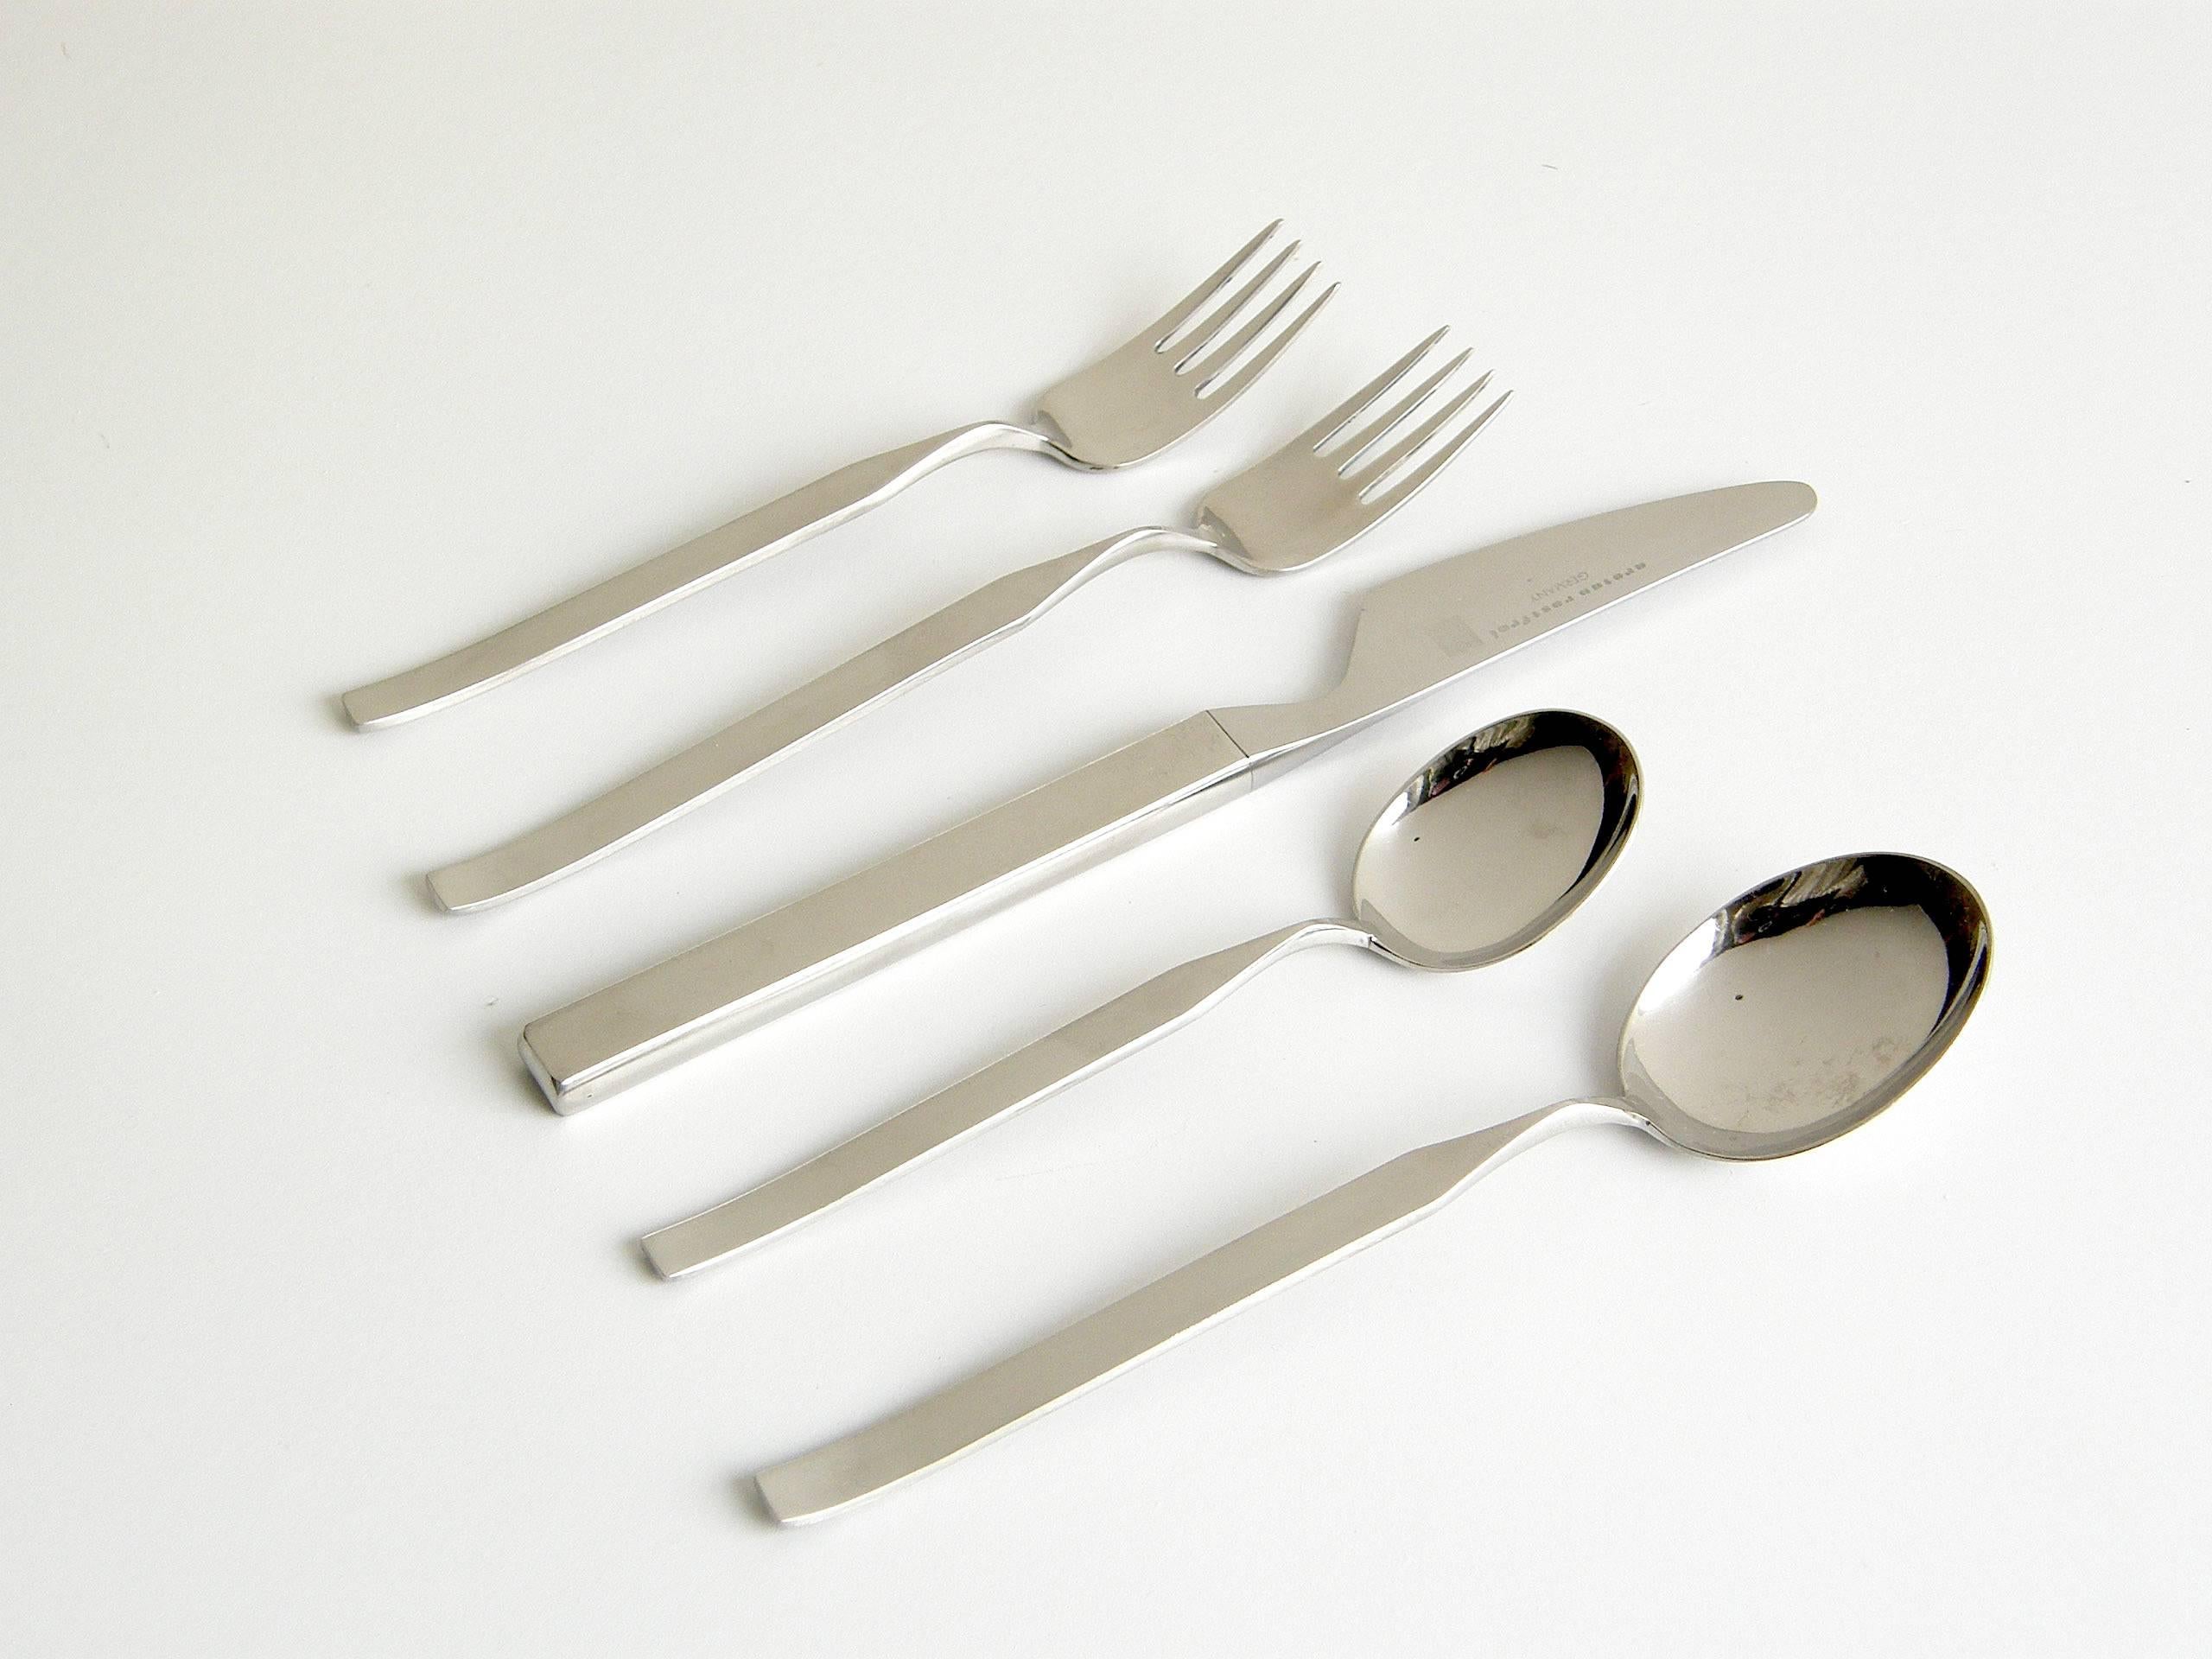 AROTAN STAINLESS FLATWARE GERMANY 5 PIECE PLACE SETTING 